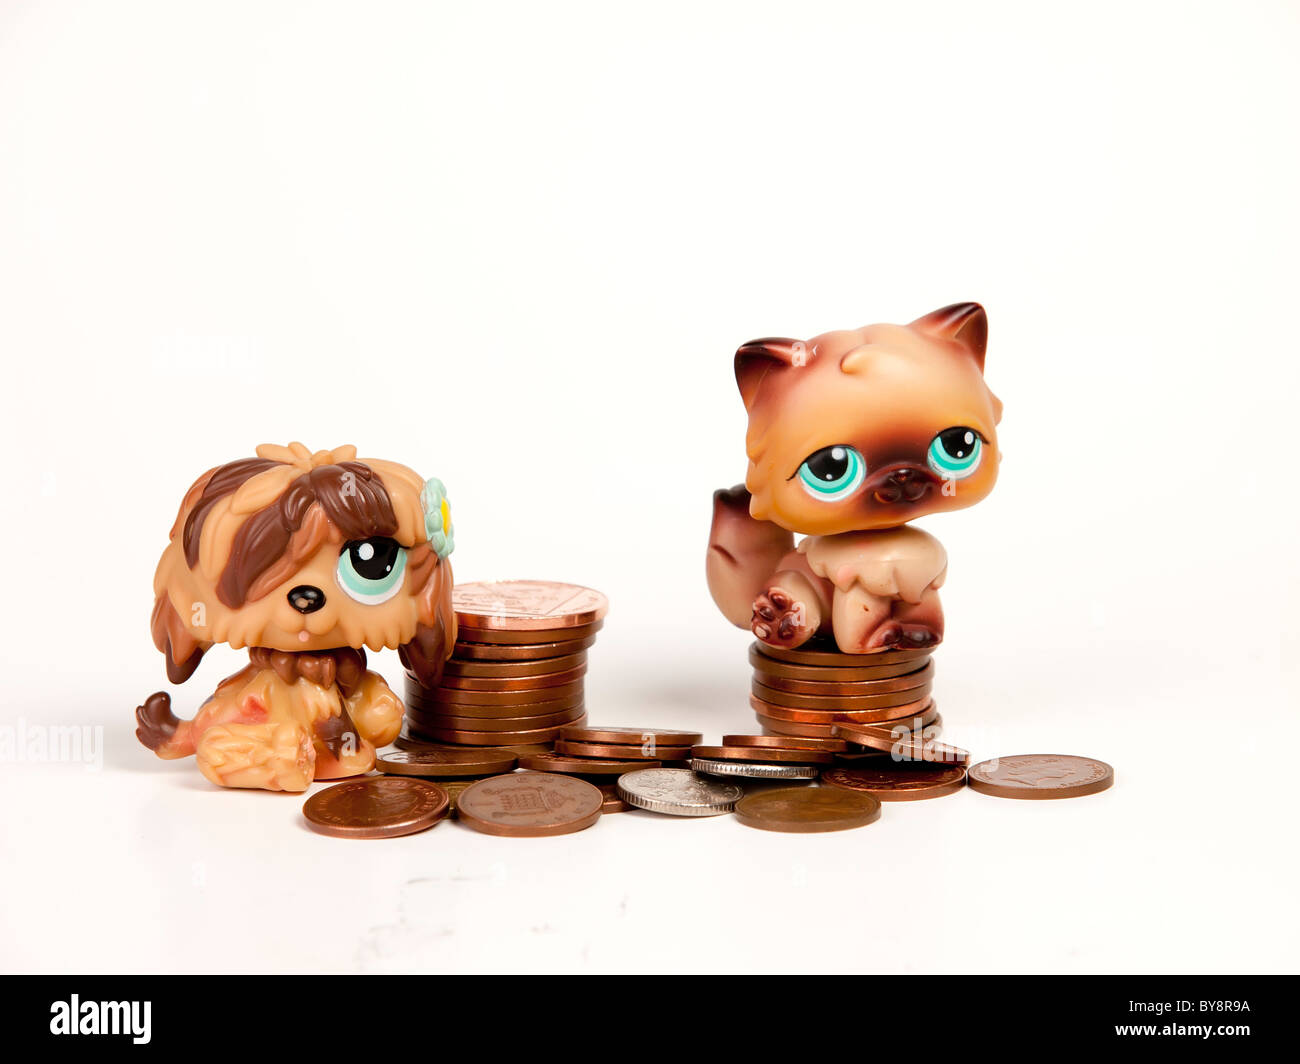 https://c8.alamy.com/comp/BY8R9A/littlest-pet-shop-dog-and-cat-sitting-on-coins-BY8R9A.jpg